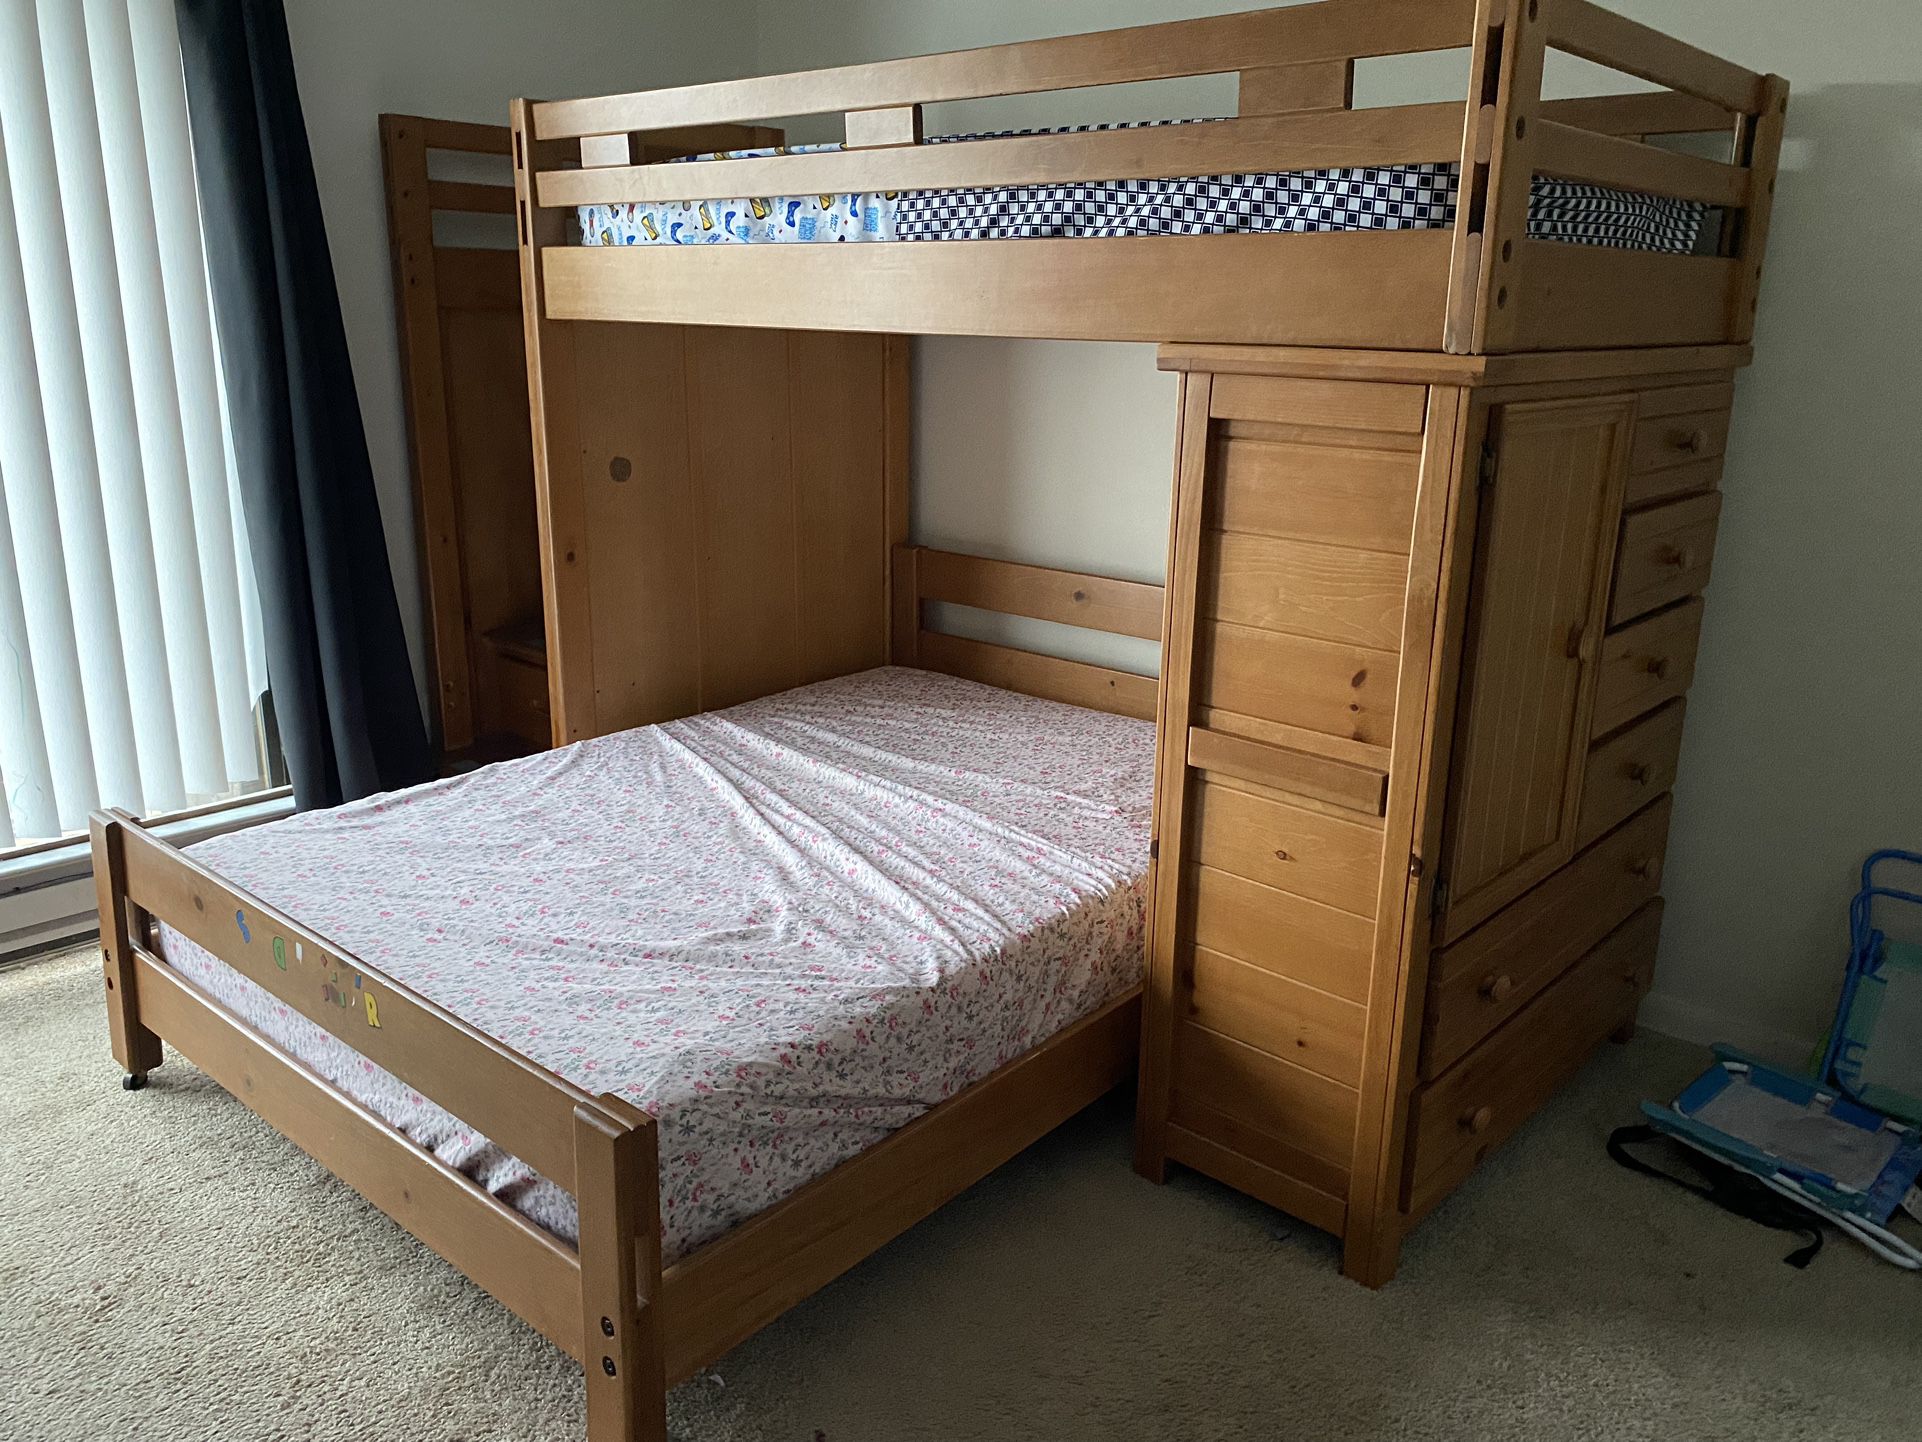 **Bunk Bed with Dresser - $500 (Good Condition, Mattresses Included)**